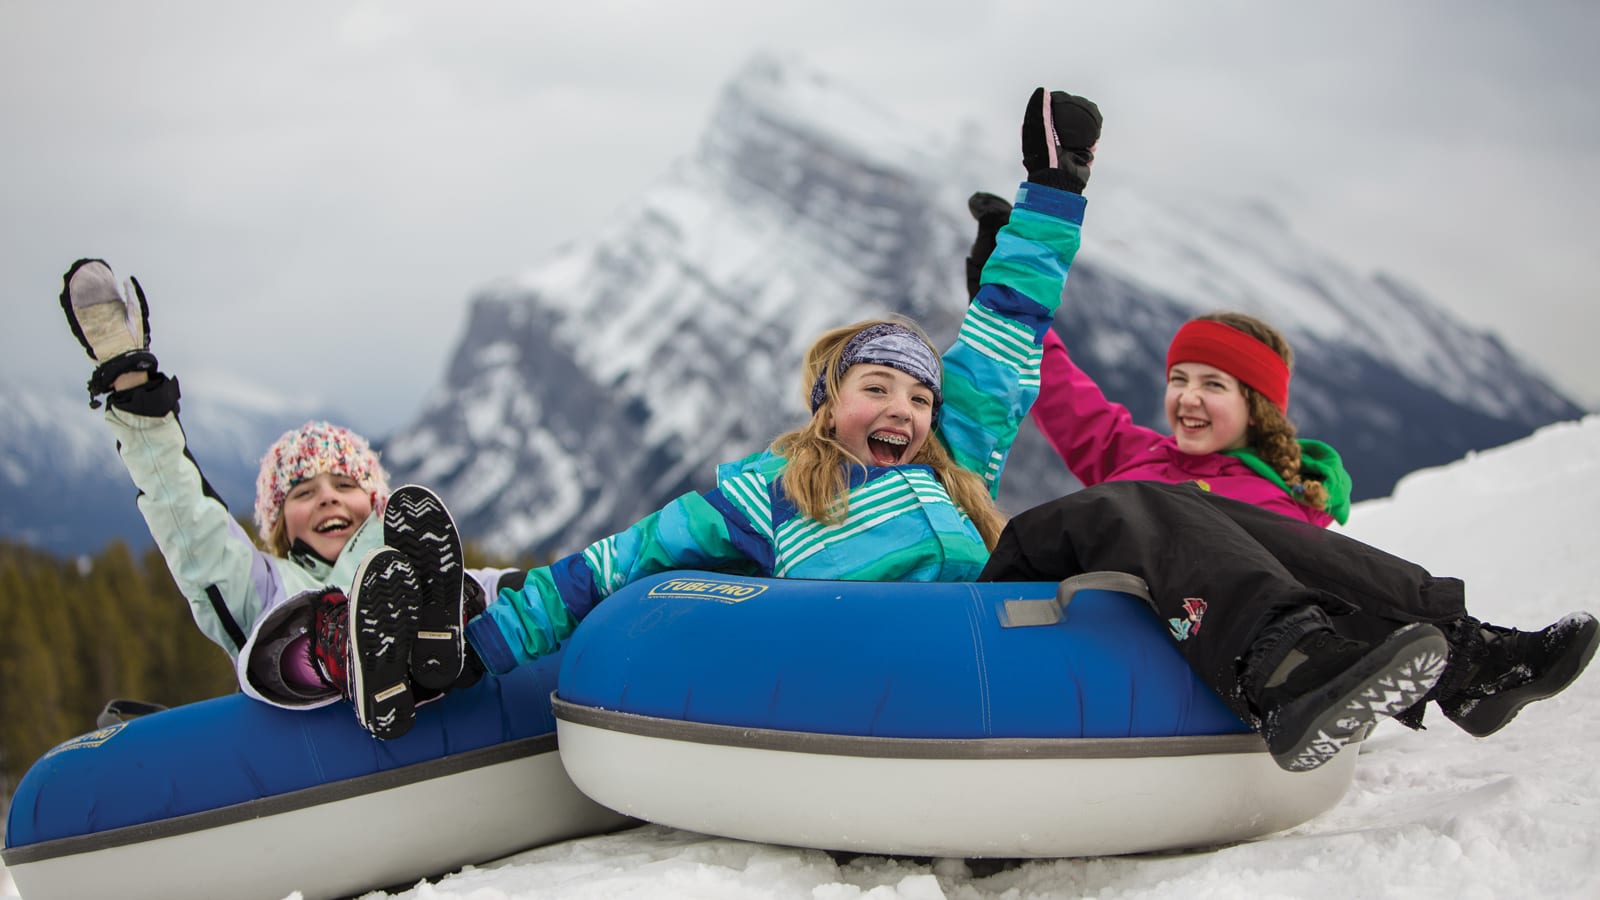 three young girls waving on snow tubes with mountains in background